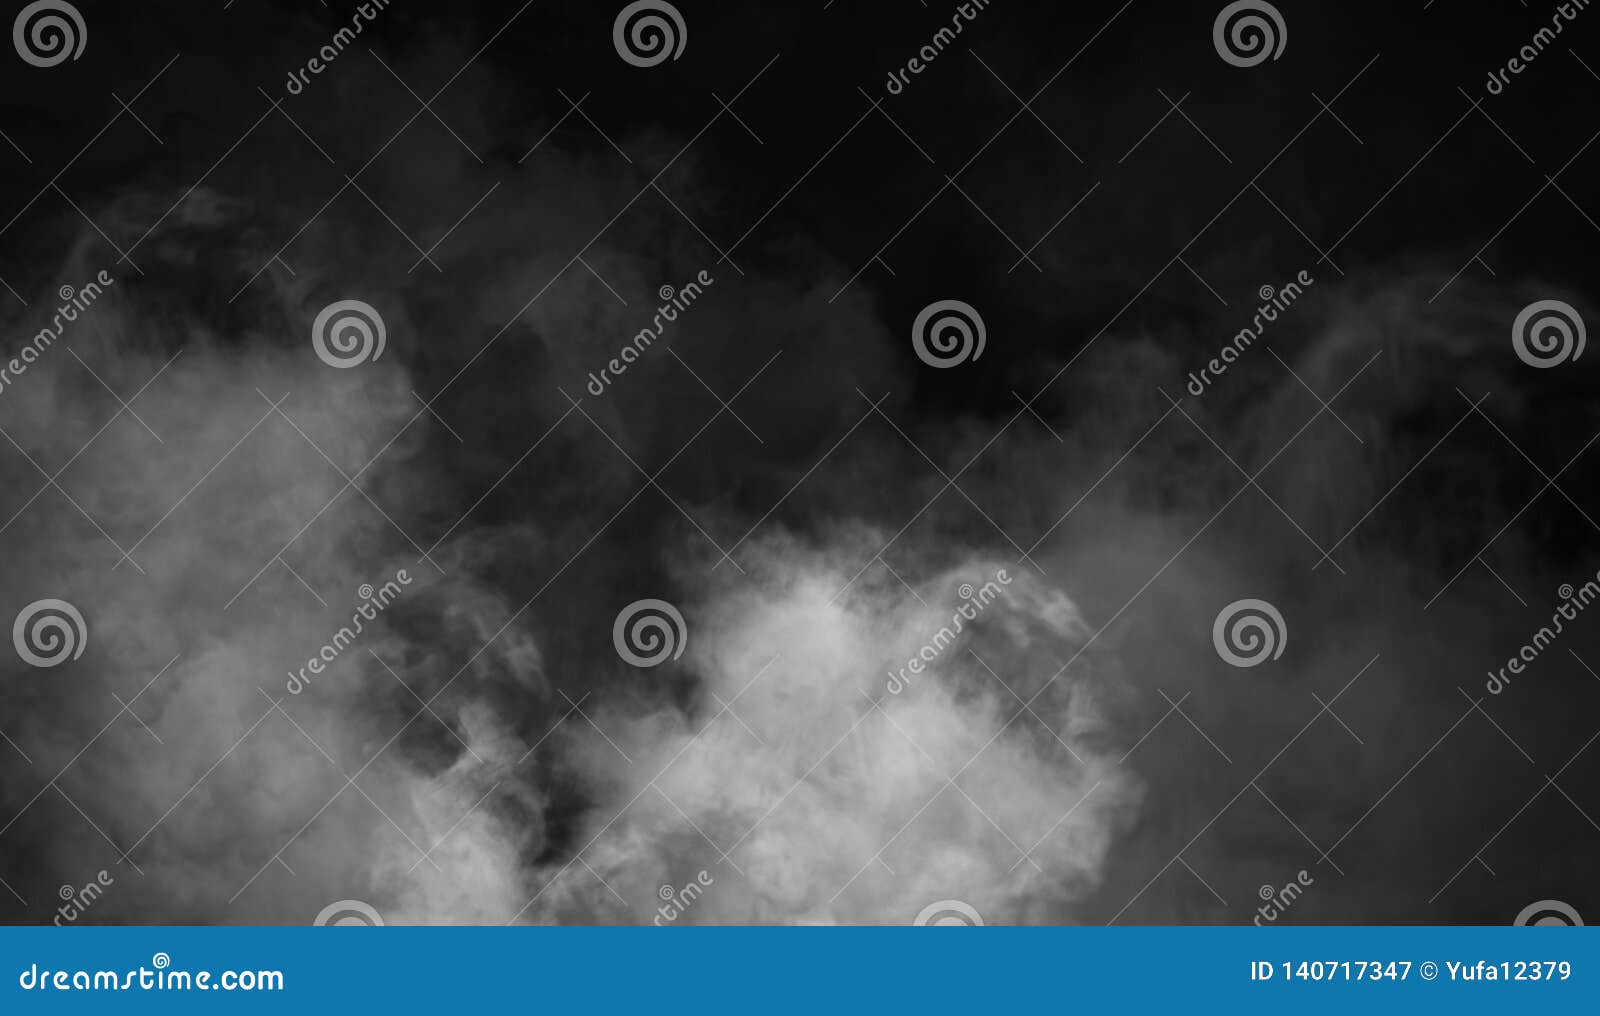 fog and mist effect on black background. smoke texture overlays